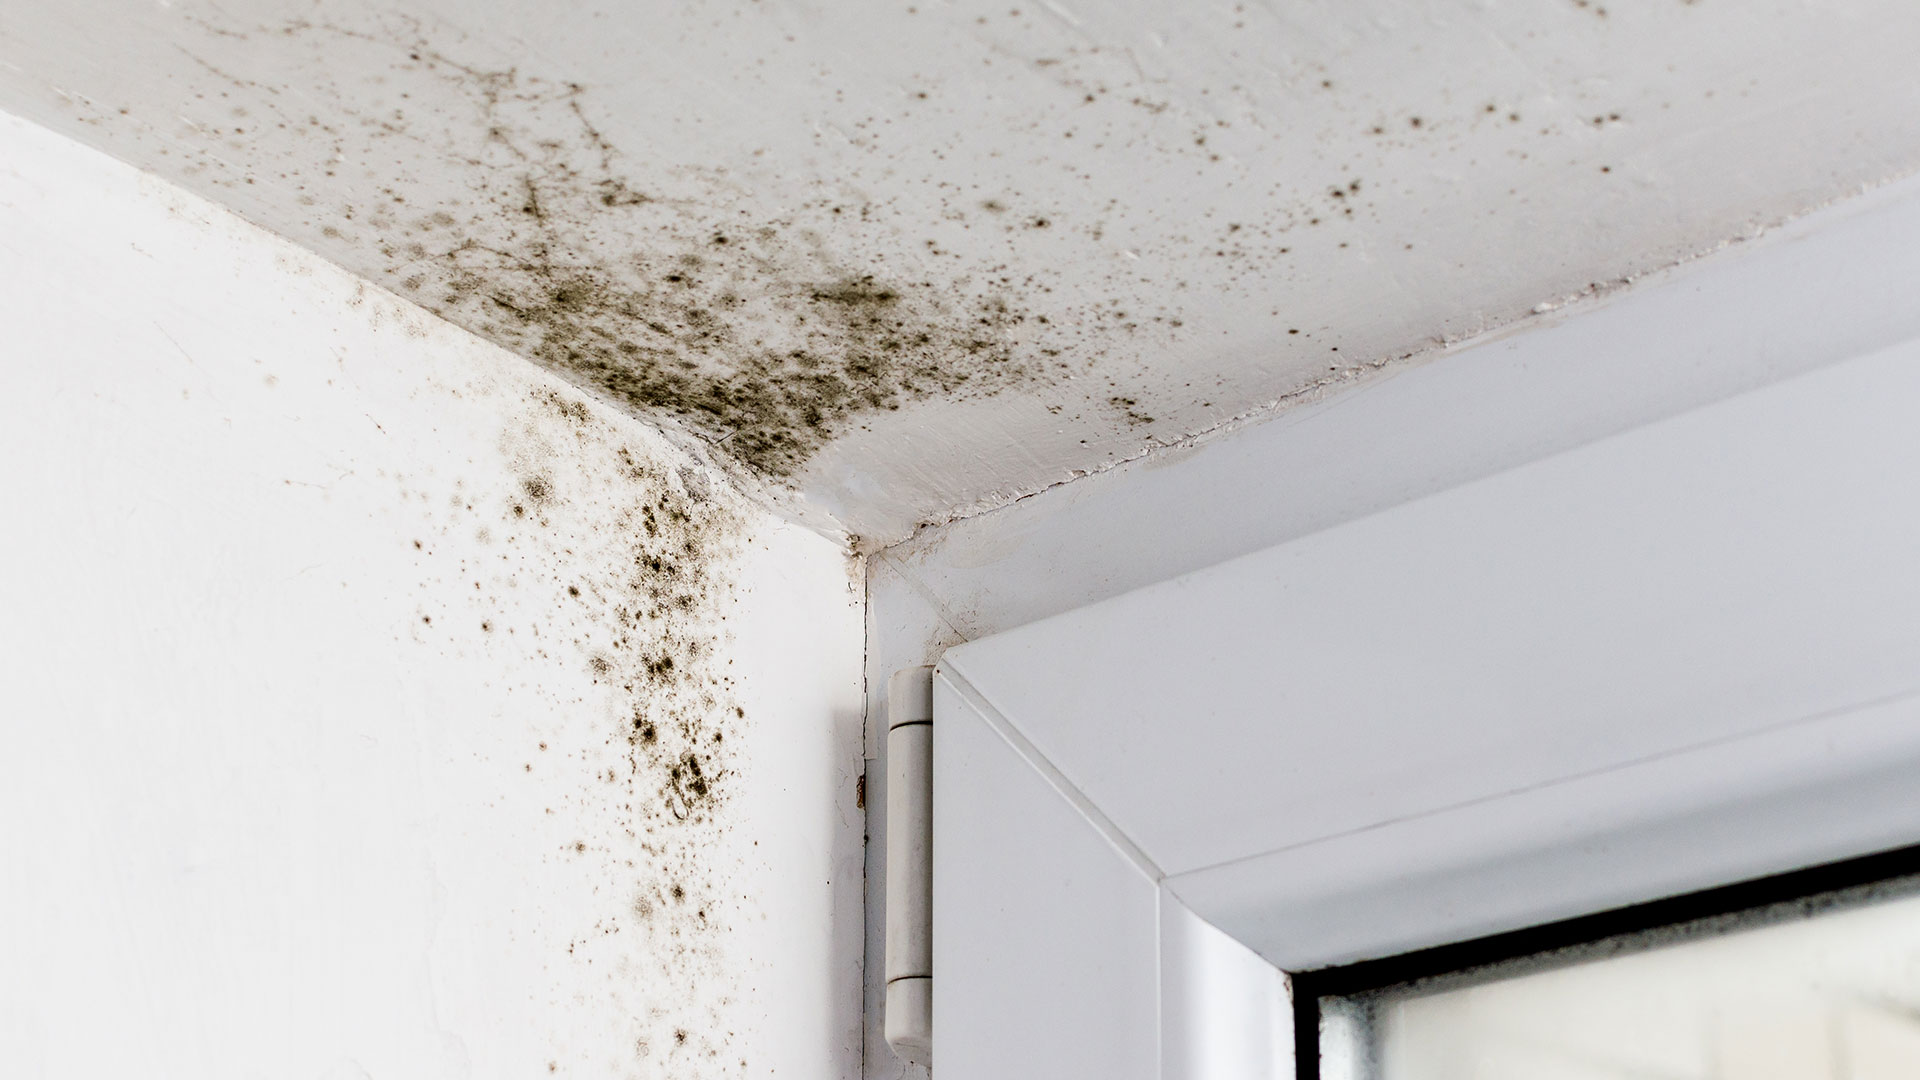 Mold Removal & Remediation Experts in Montgomery County MD